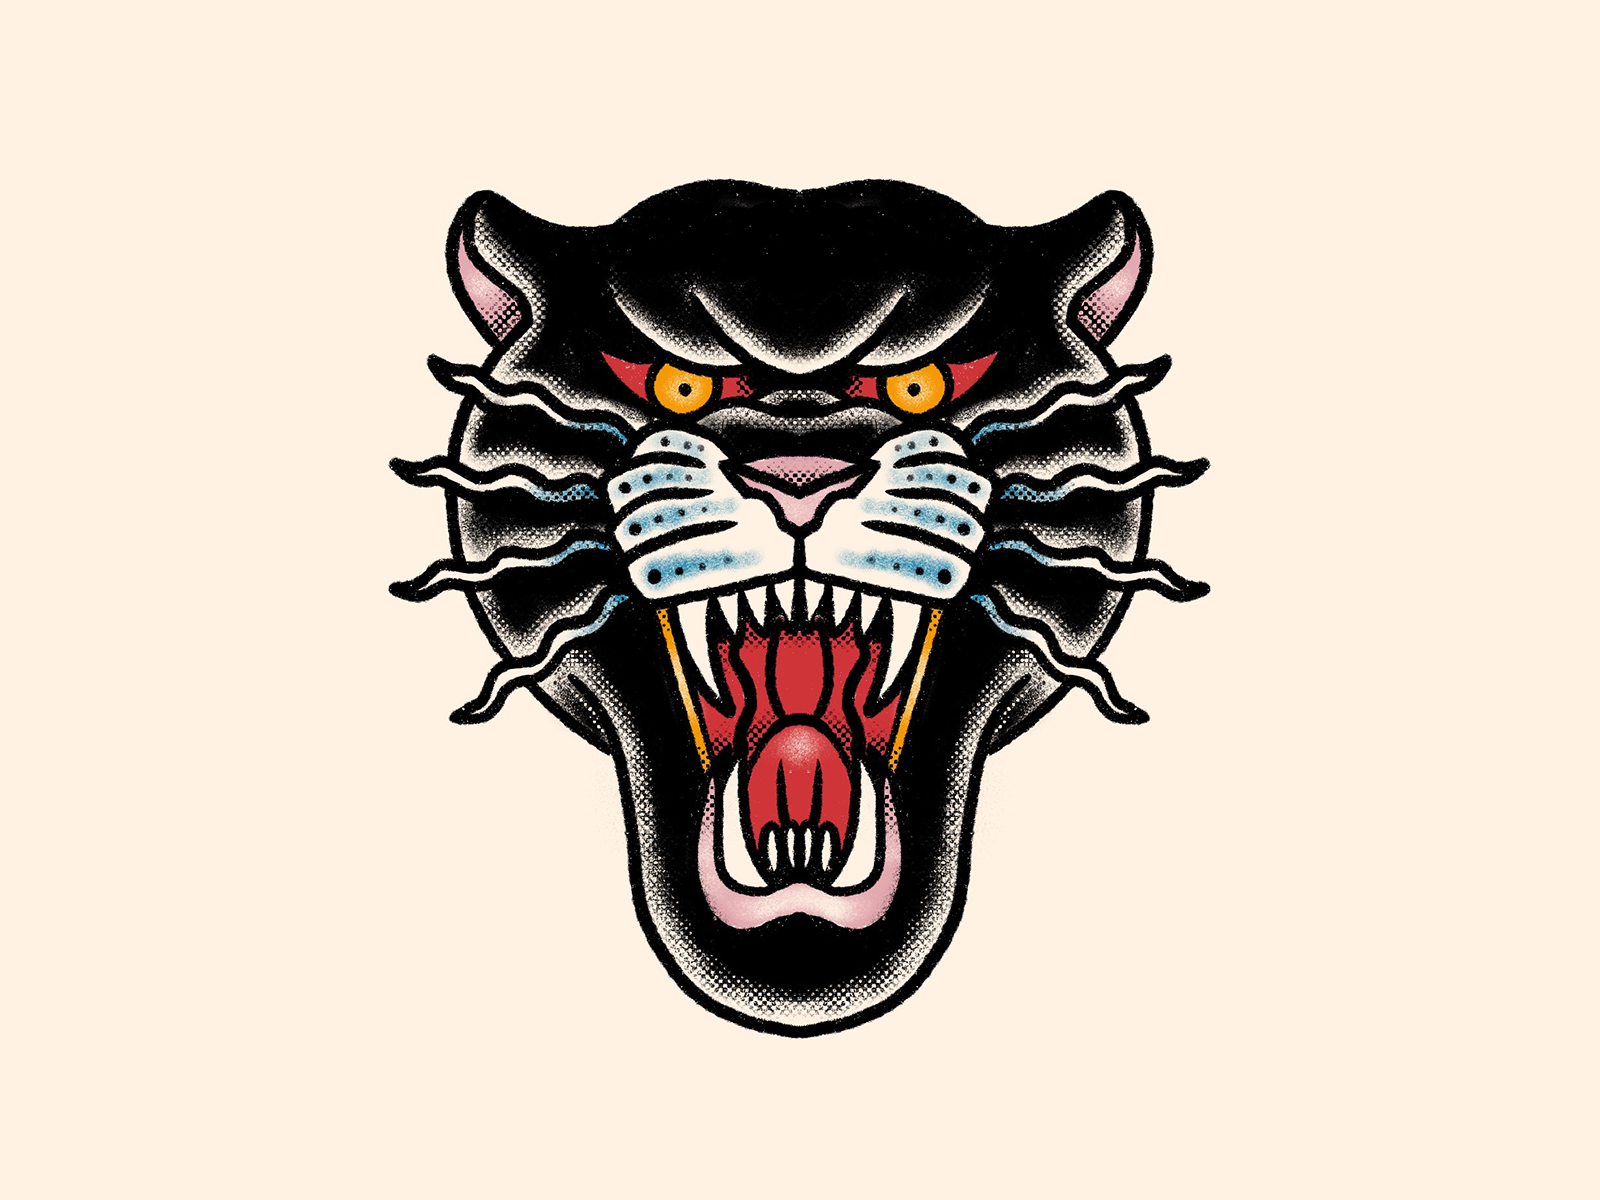 2100 Panther Tattoo Stock Photos Pictures  RoyaltyFree Images  iStock   Black panther tattoo